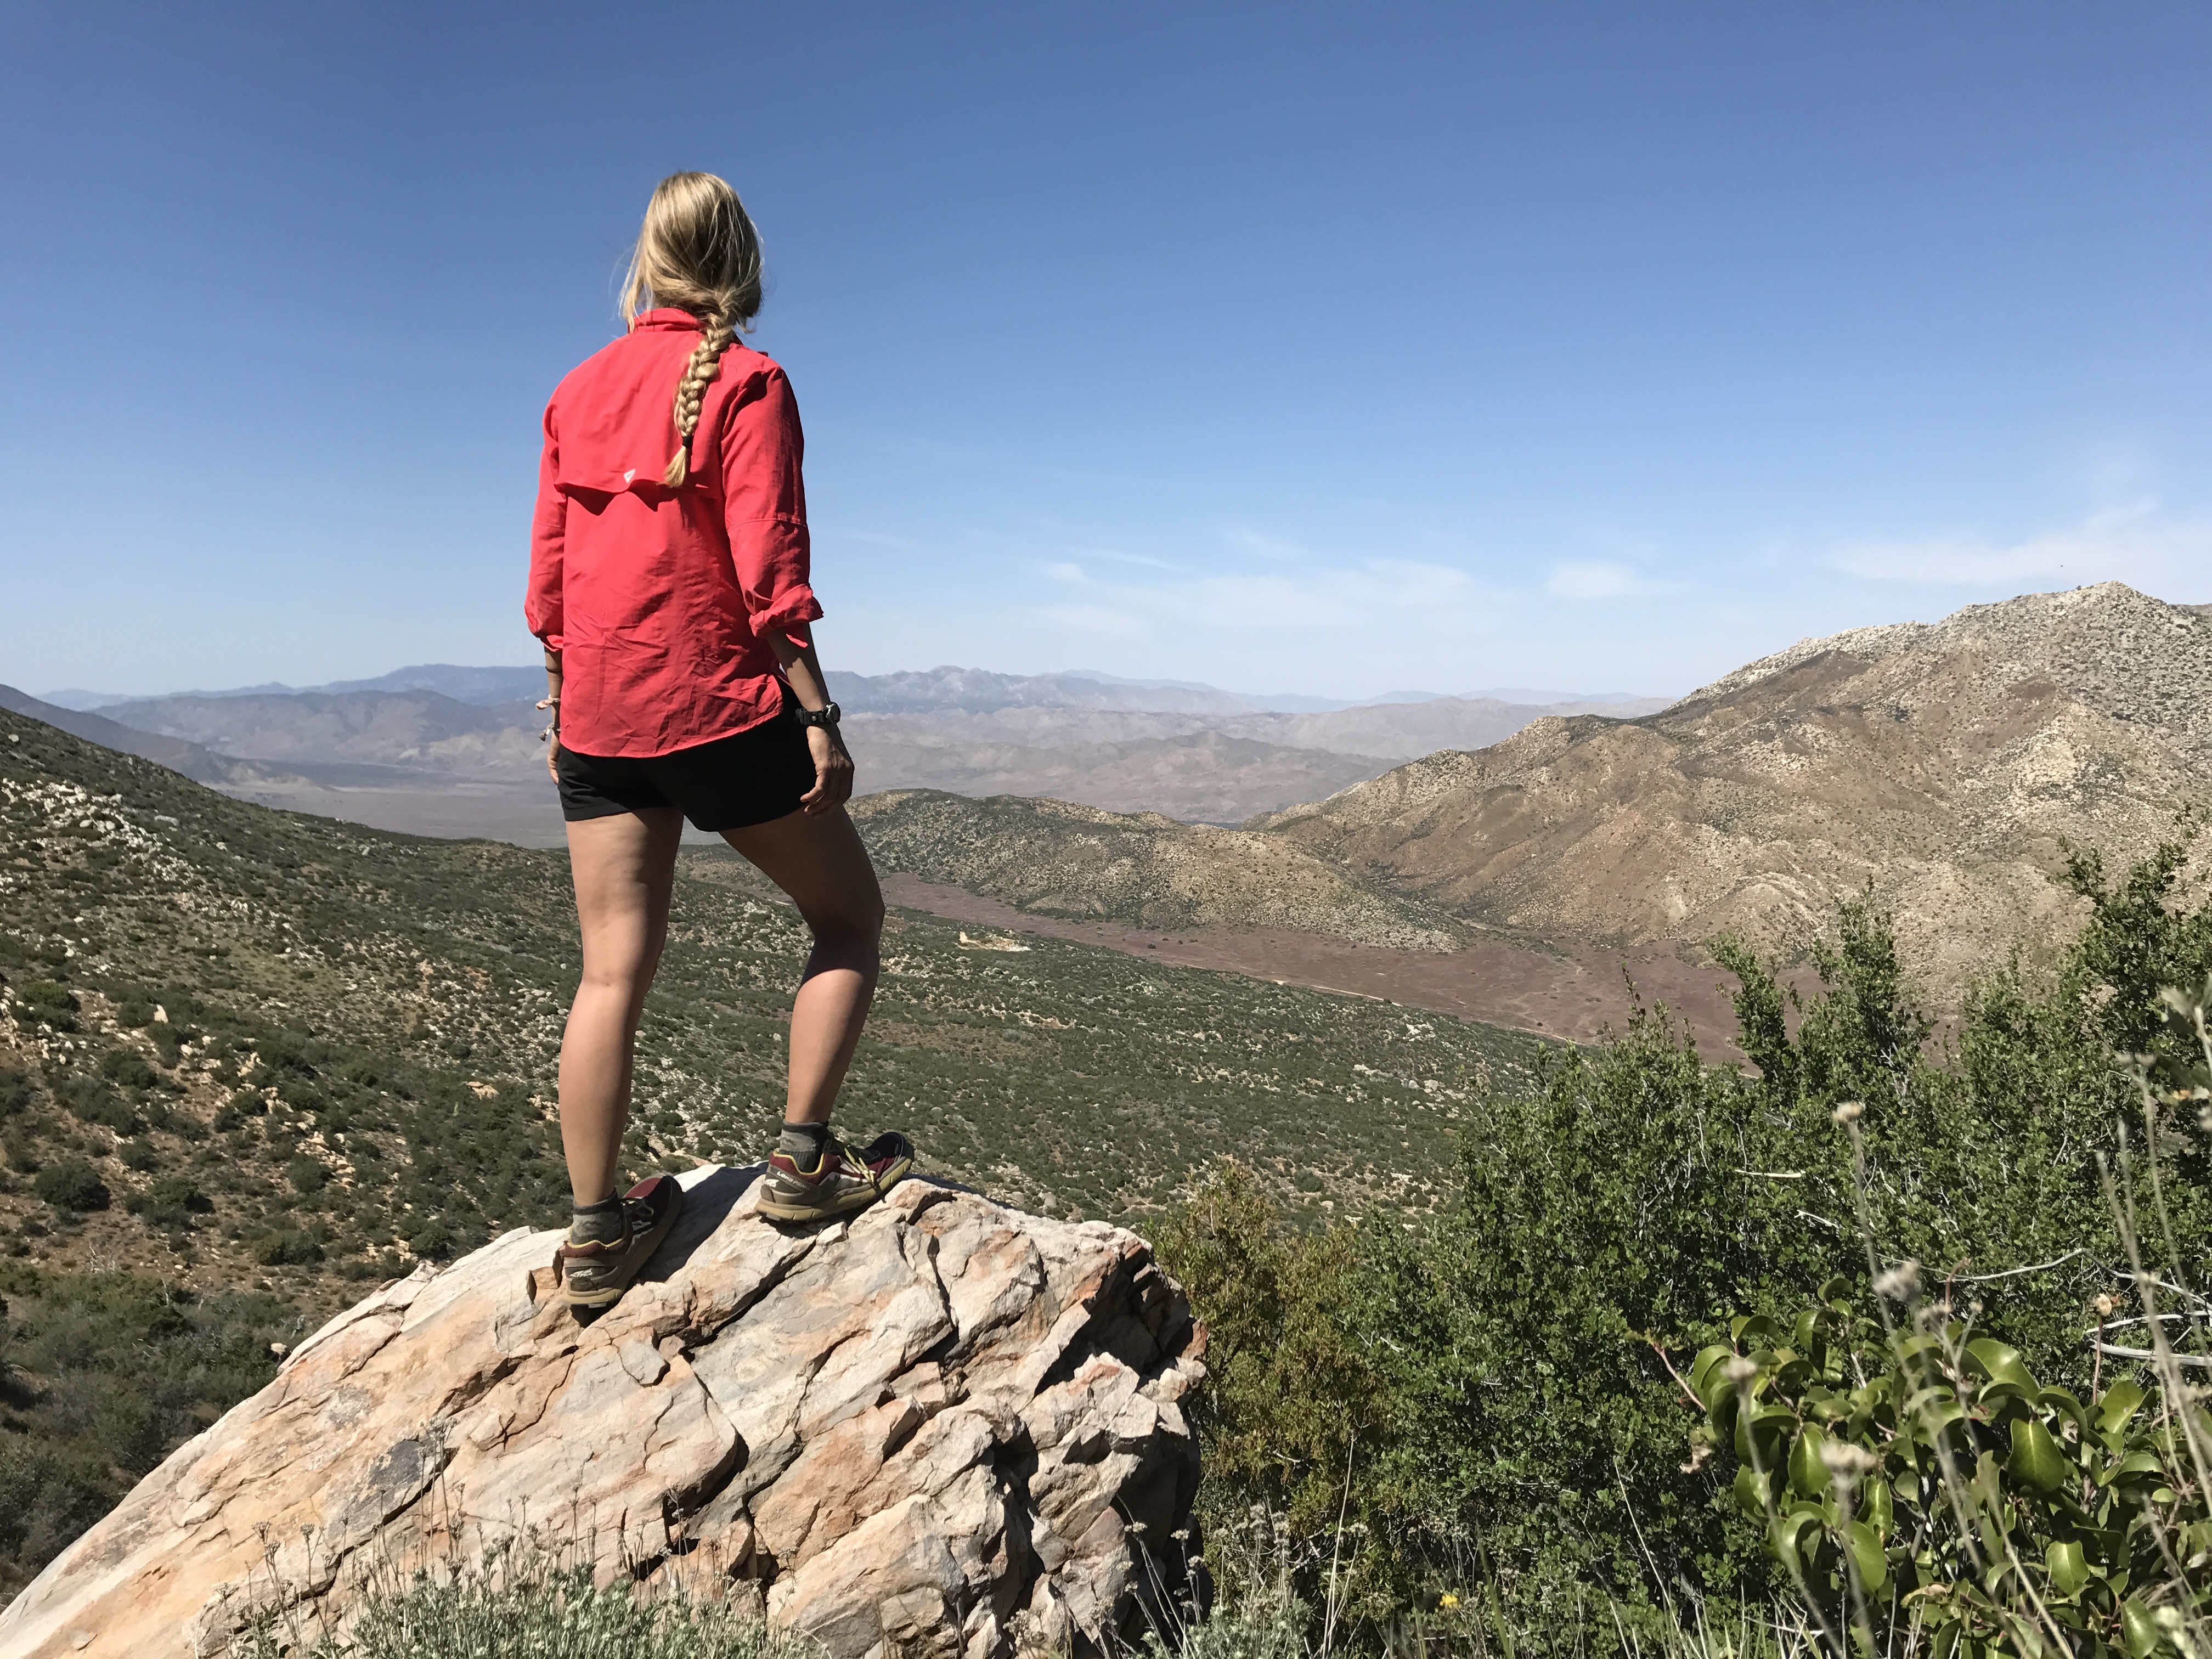 Opelika hiker conquers Pacific Crest Trail